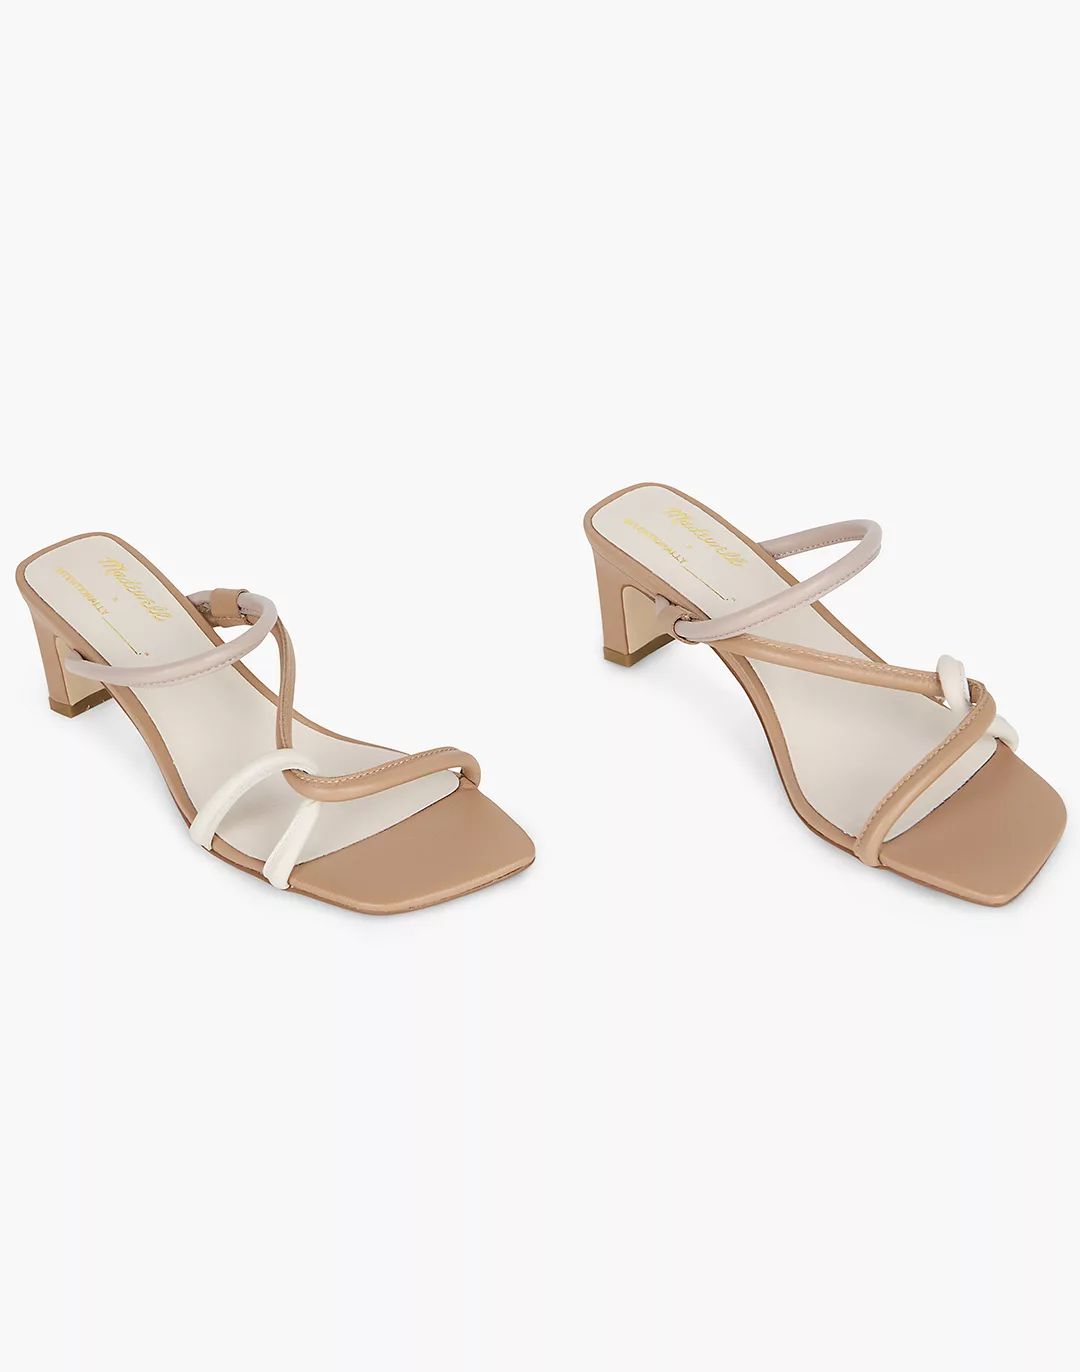 Madewell x Intentionally Blank Willow Sandals in Clay Combo | Madewell